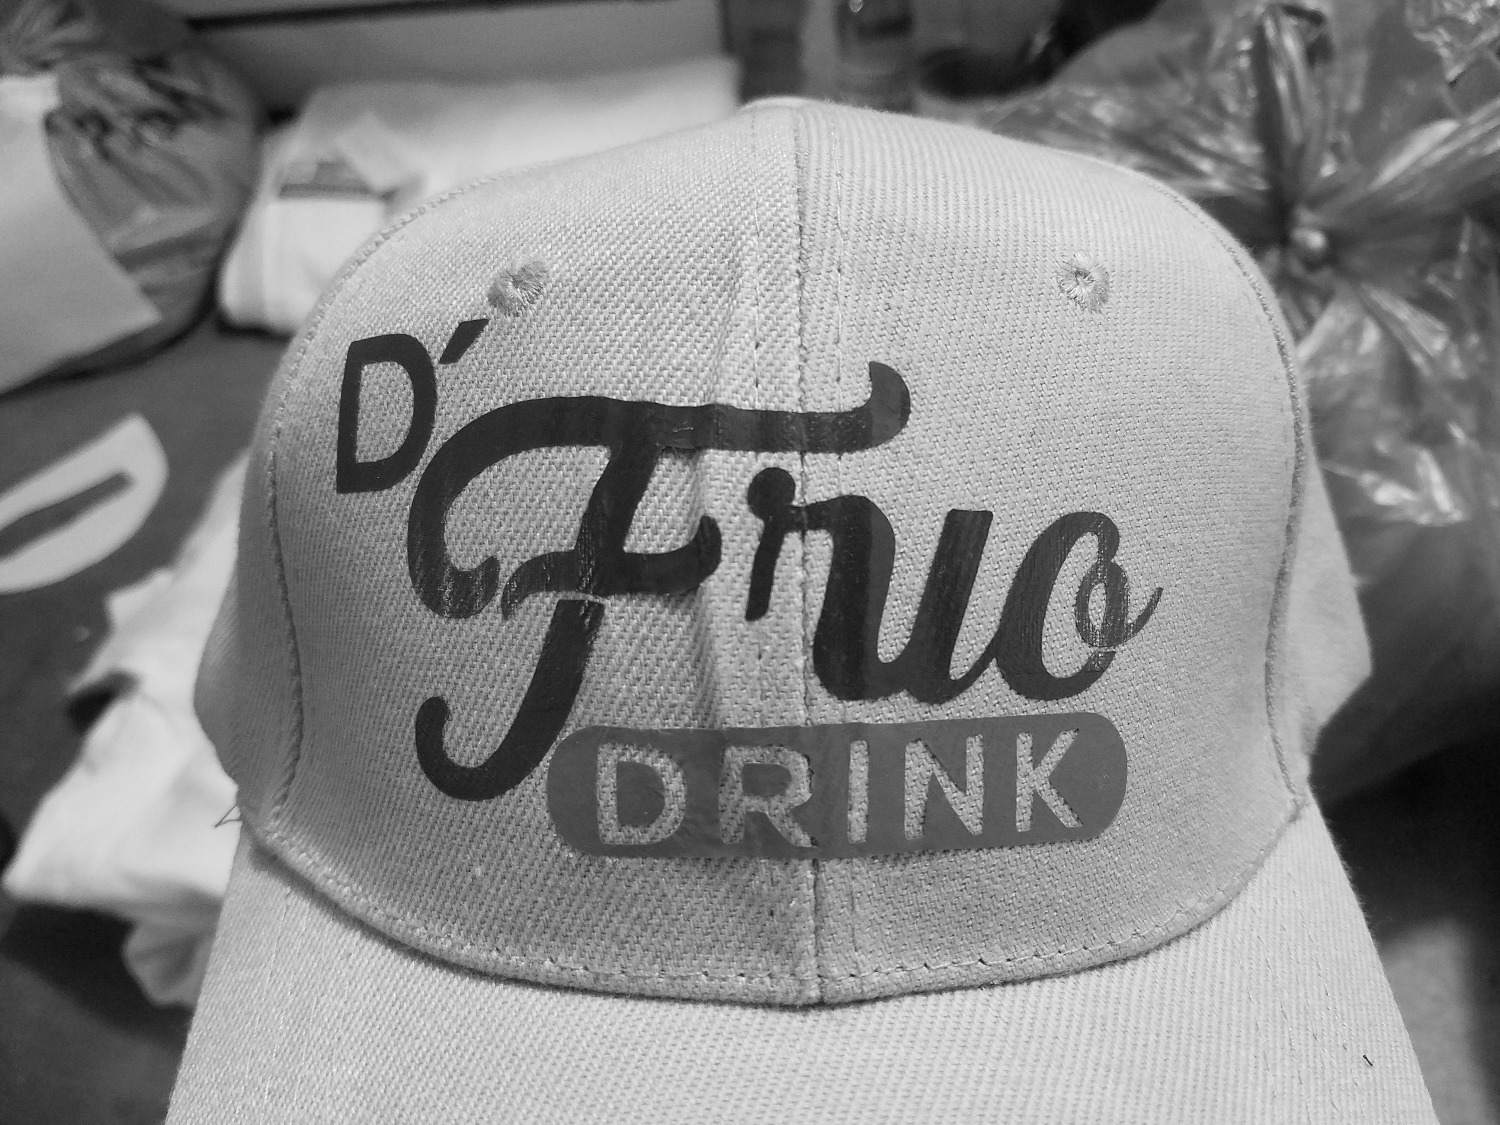 Frio - Need to find this one